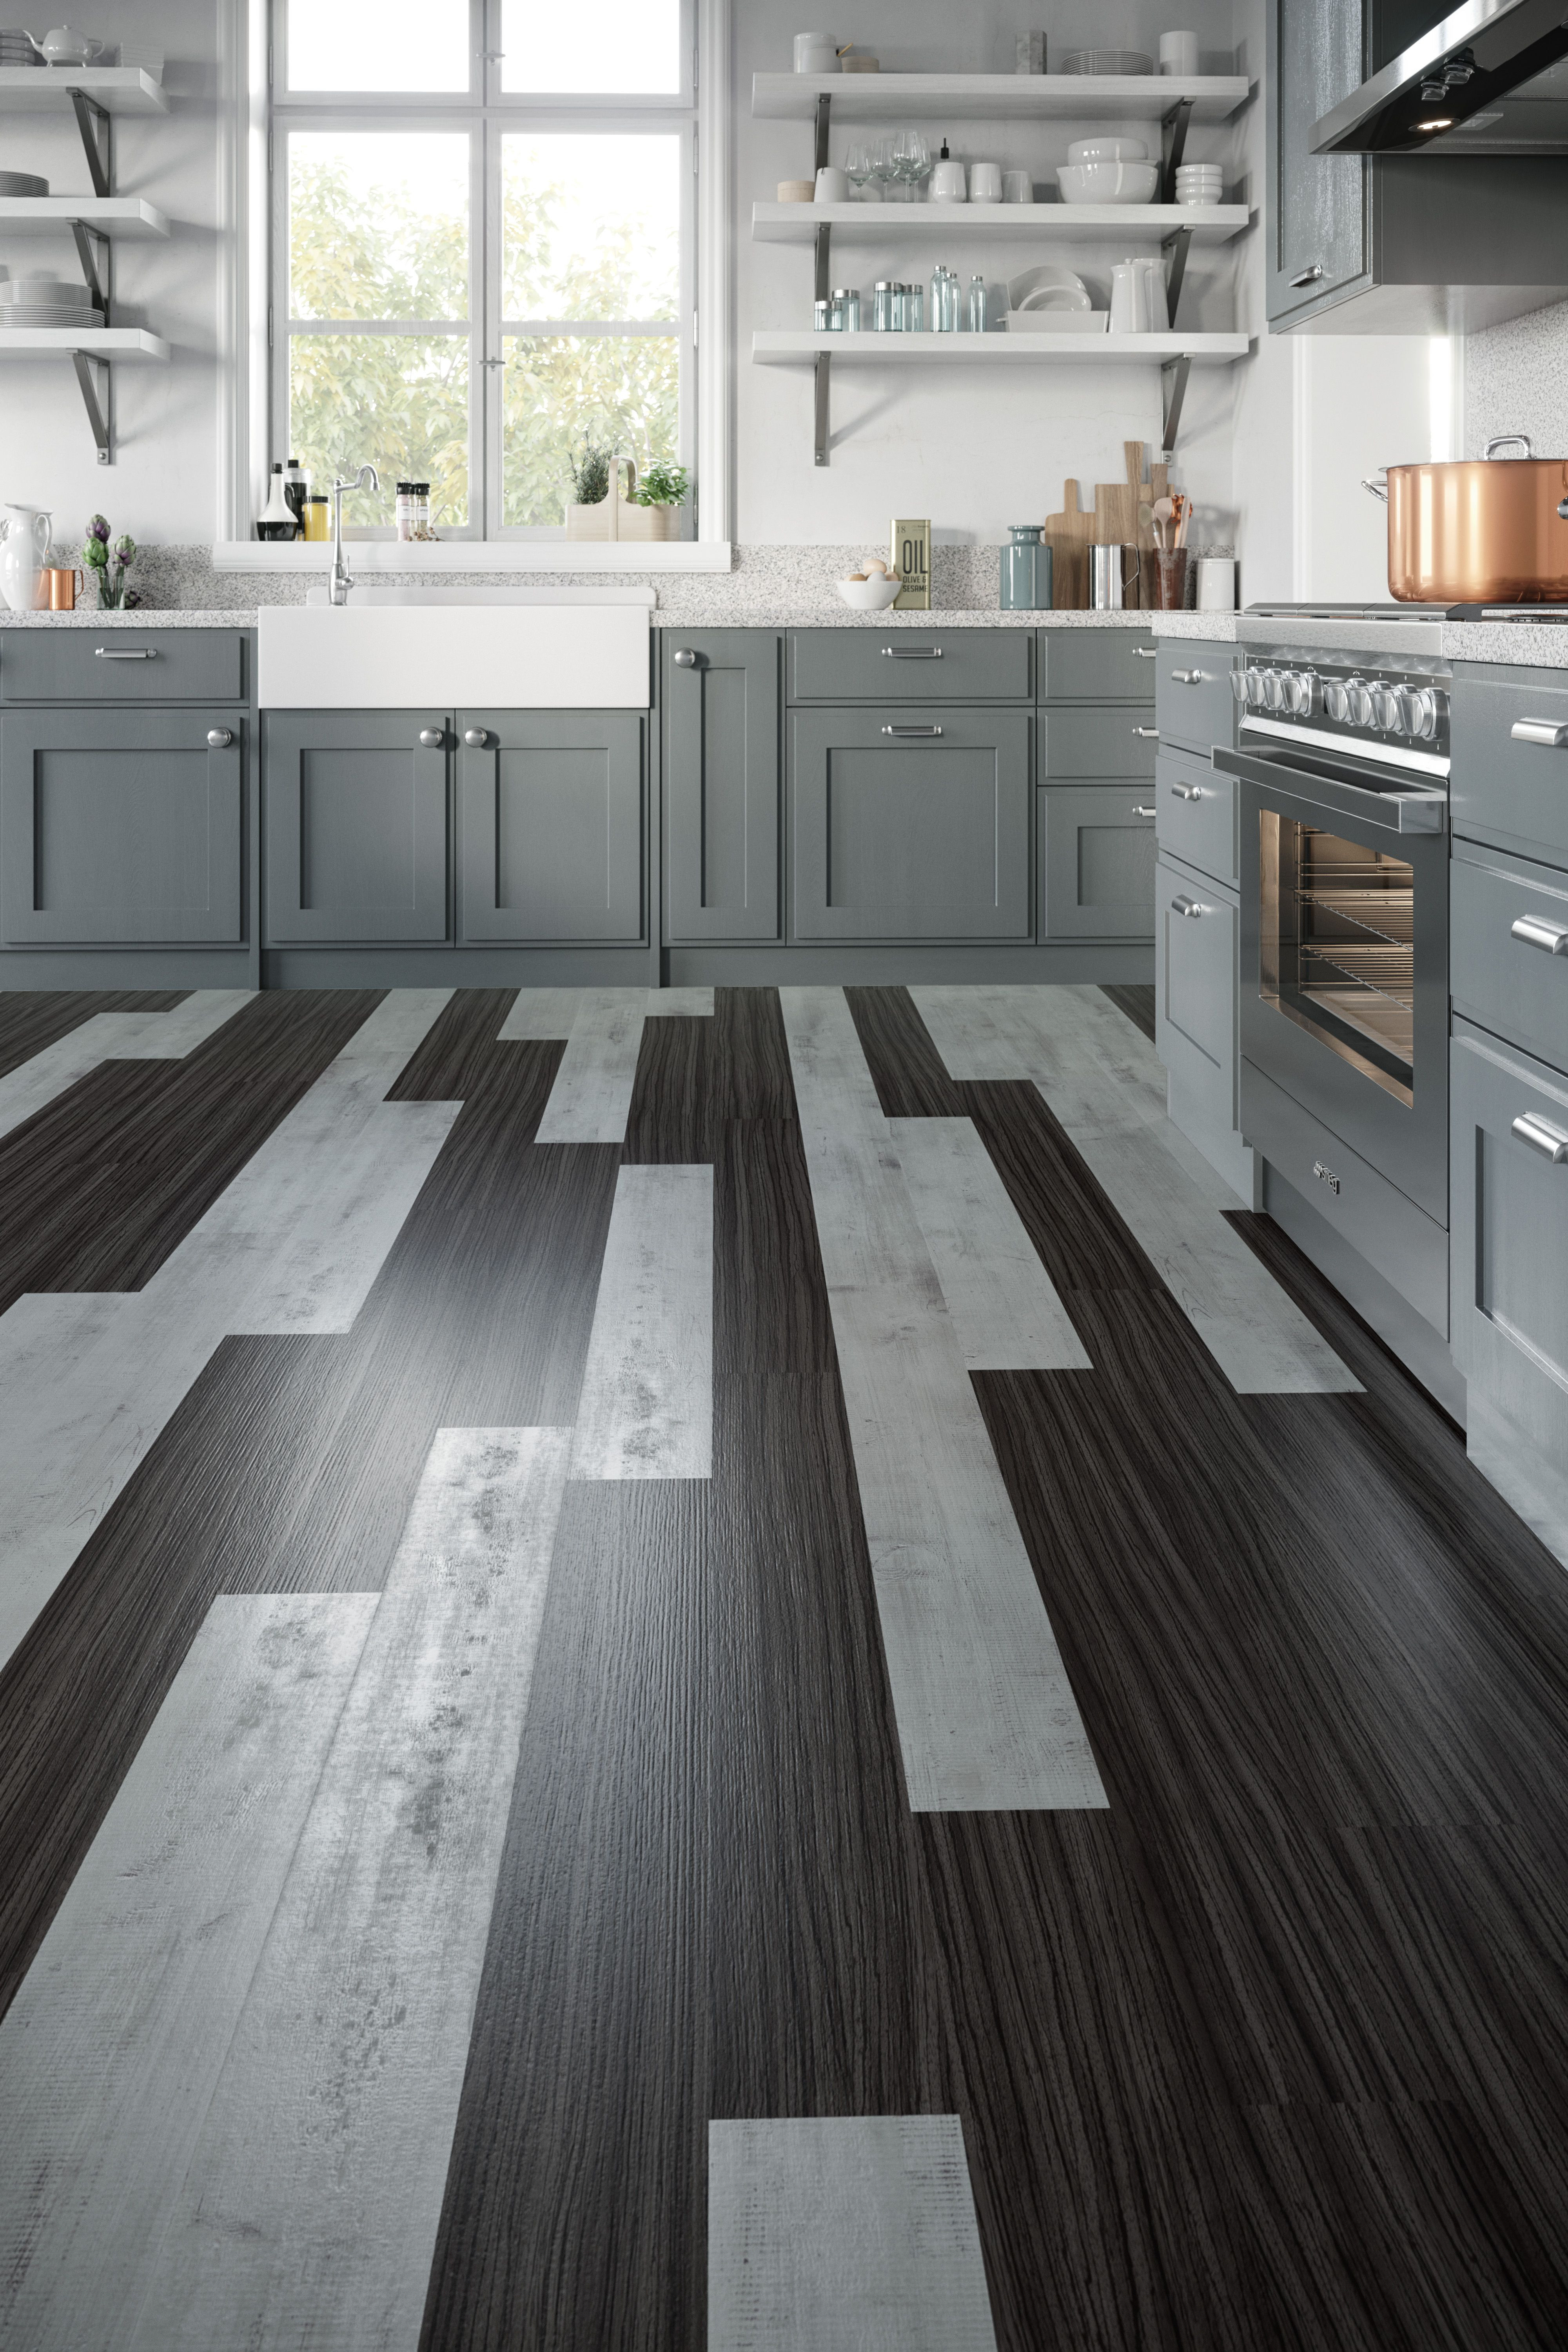 28 Famous Hardwood Floor solutions 2022 free download hardwood floor solutions of featuring luxury vinyl plank and tile point of view from our design intended for featuring luxury vinyl plank and tile point of view from our design mix flooring 